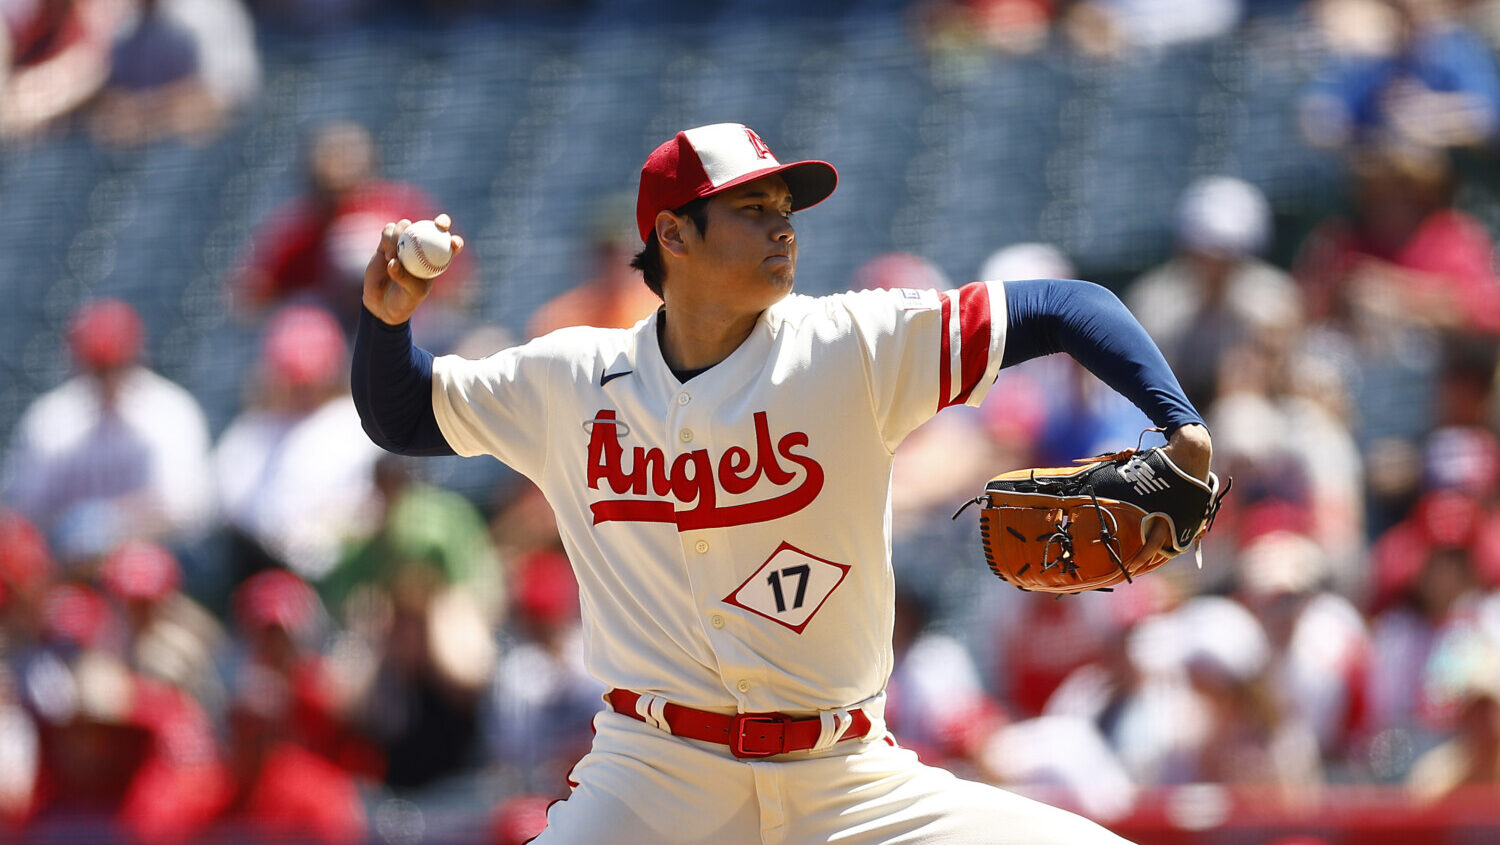 MLB official: Shohei Ohtani could get a record $600 million deal